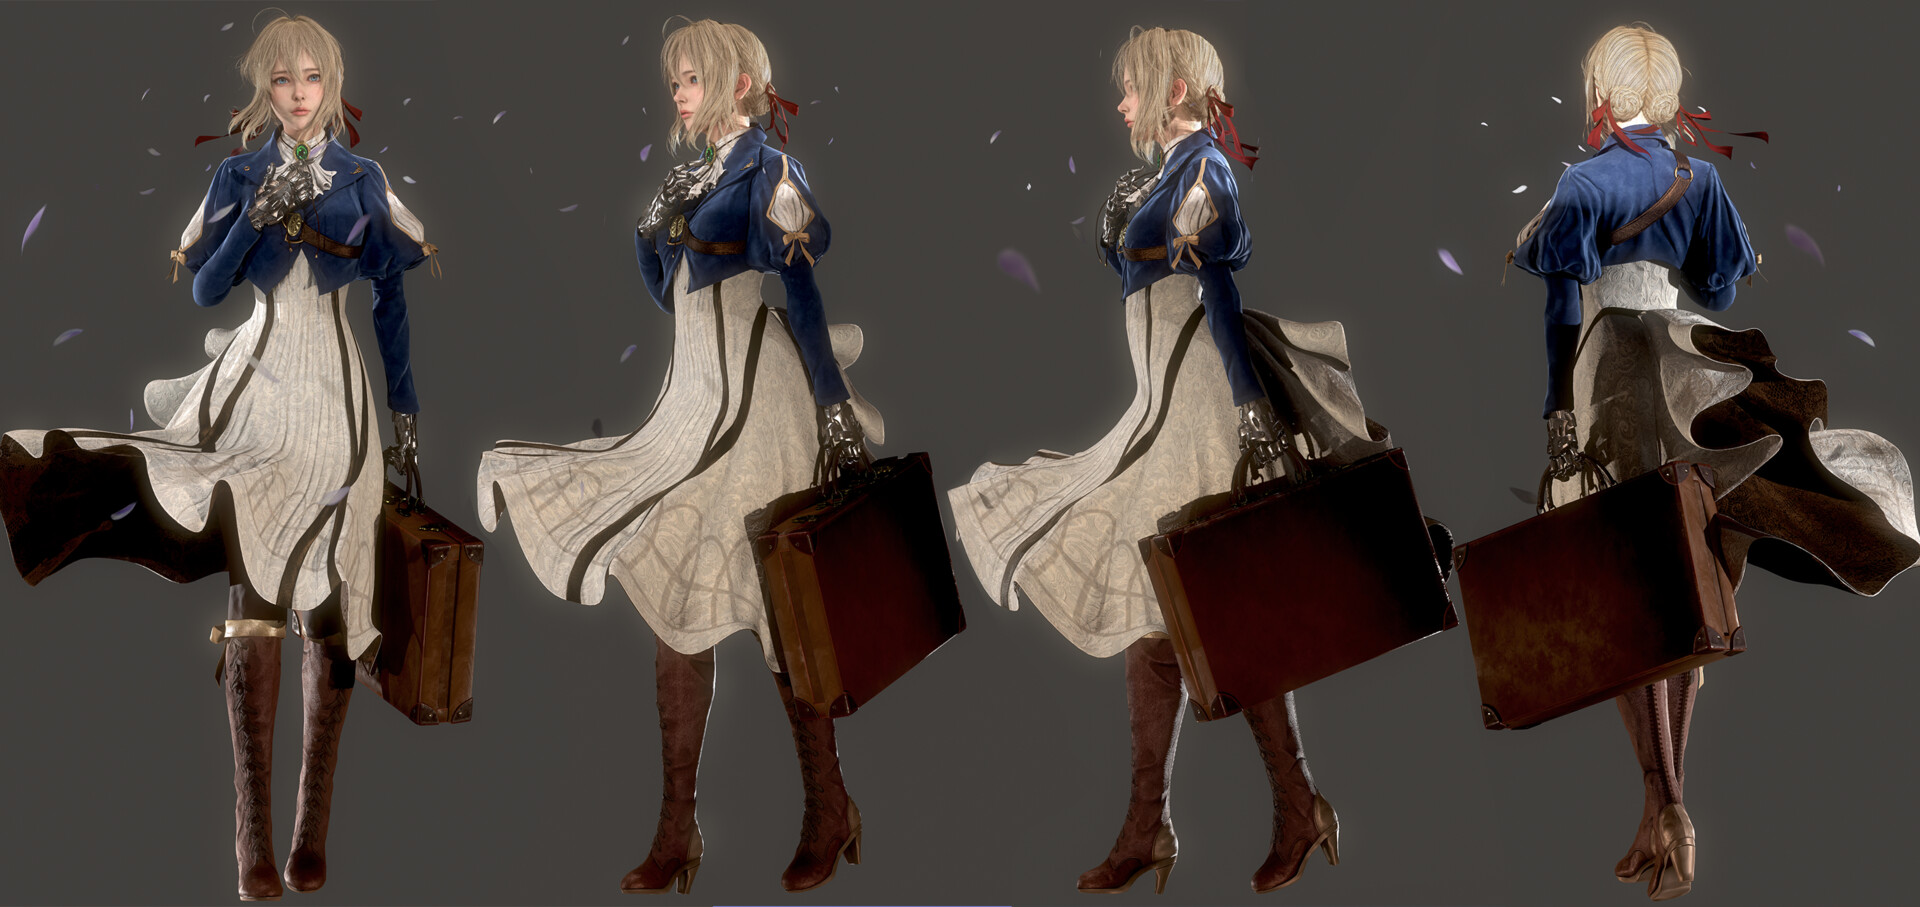 I designed a character named Violet Evergarden into Real-time 3D Character ...